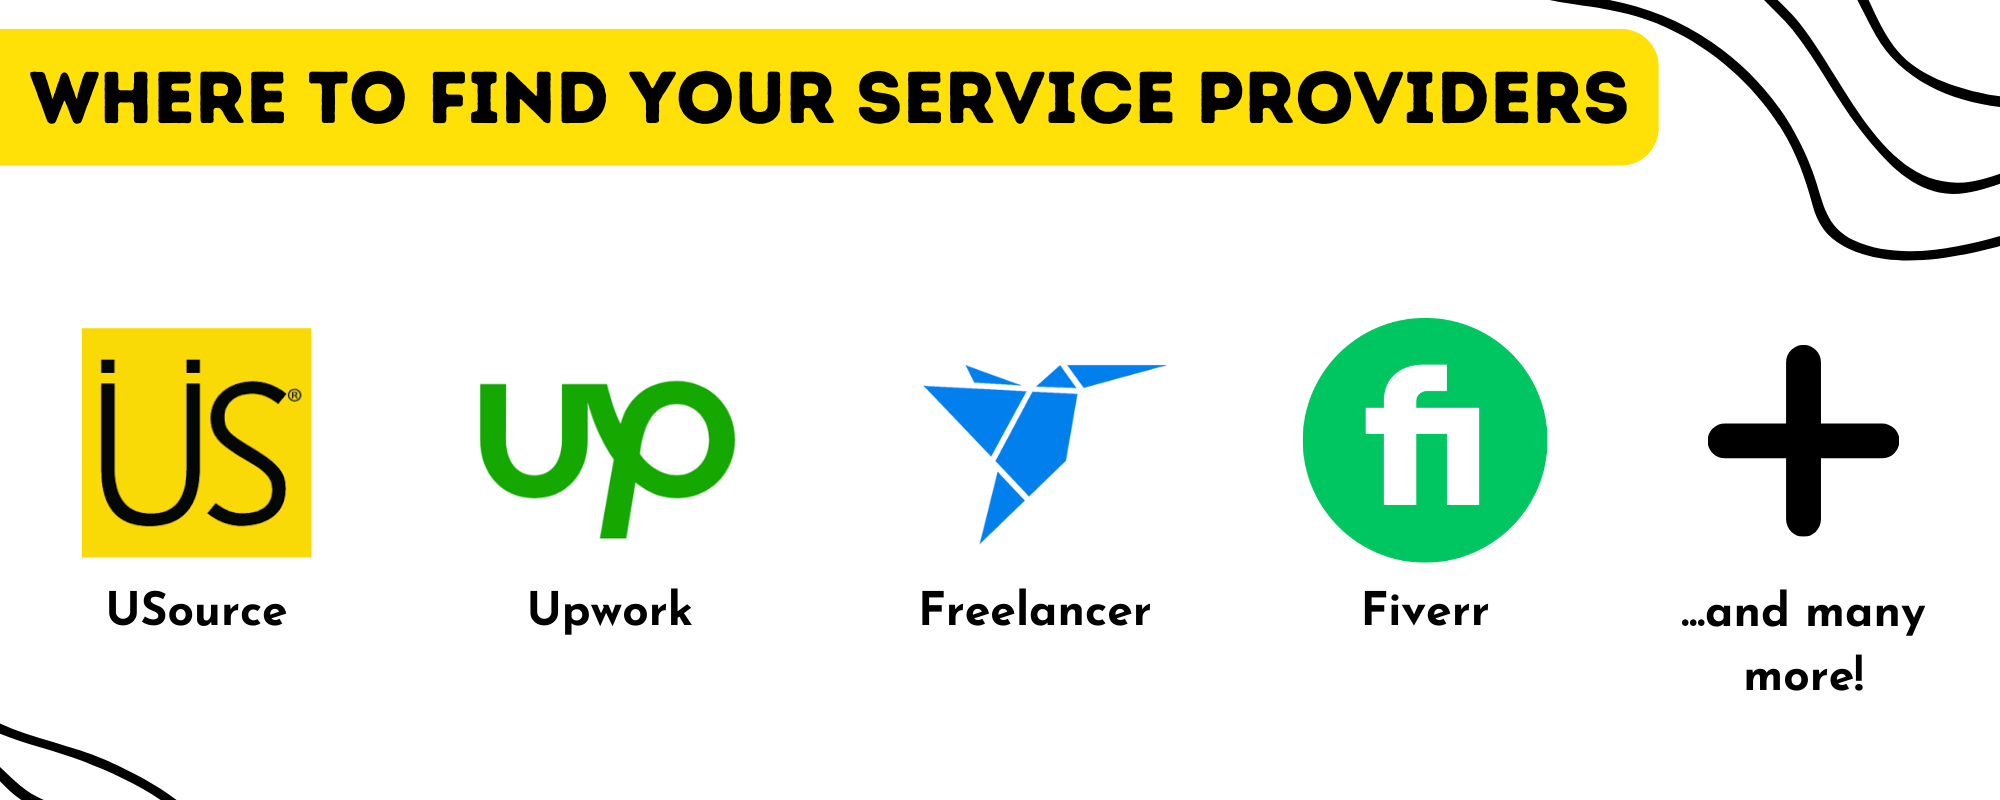 Logos of service providers listed below